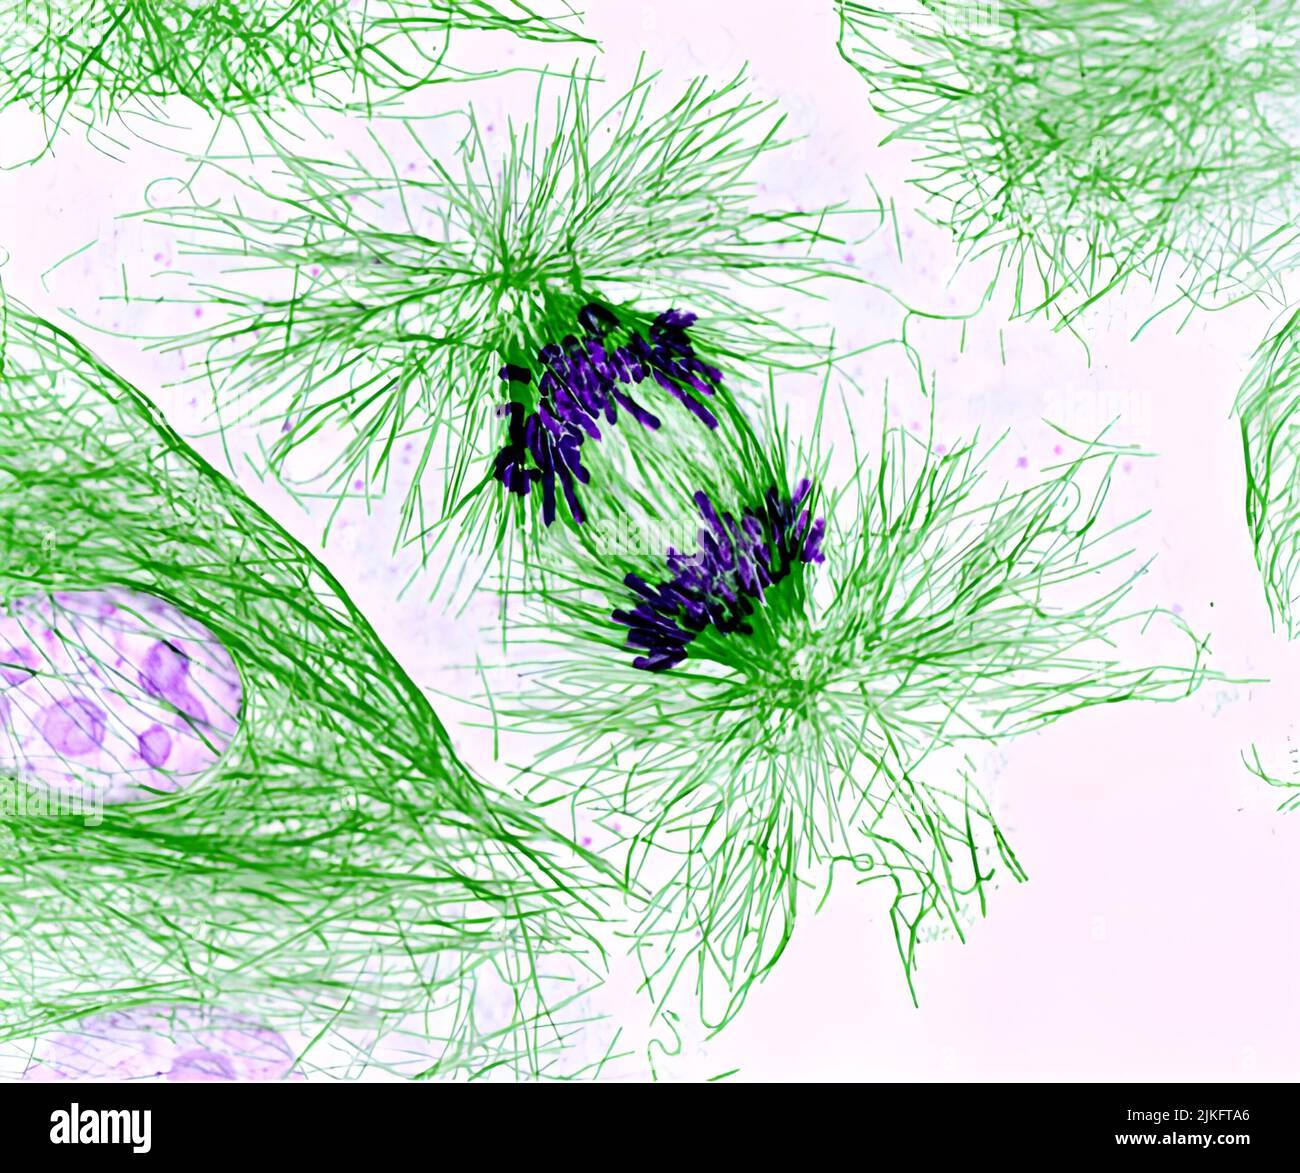 This pig cell is dividing. The chromosomes (purple) have already replicated and the duplicates are separated by fibers in the cell skeleton called microtubules (green). Cell division studies provide essential knowledge to advance the understanding of many human diseases, including cancer and birth defects. Stock Photo